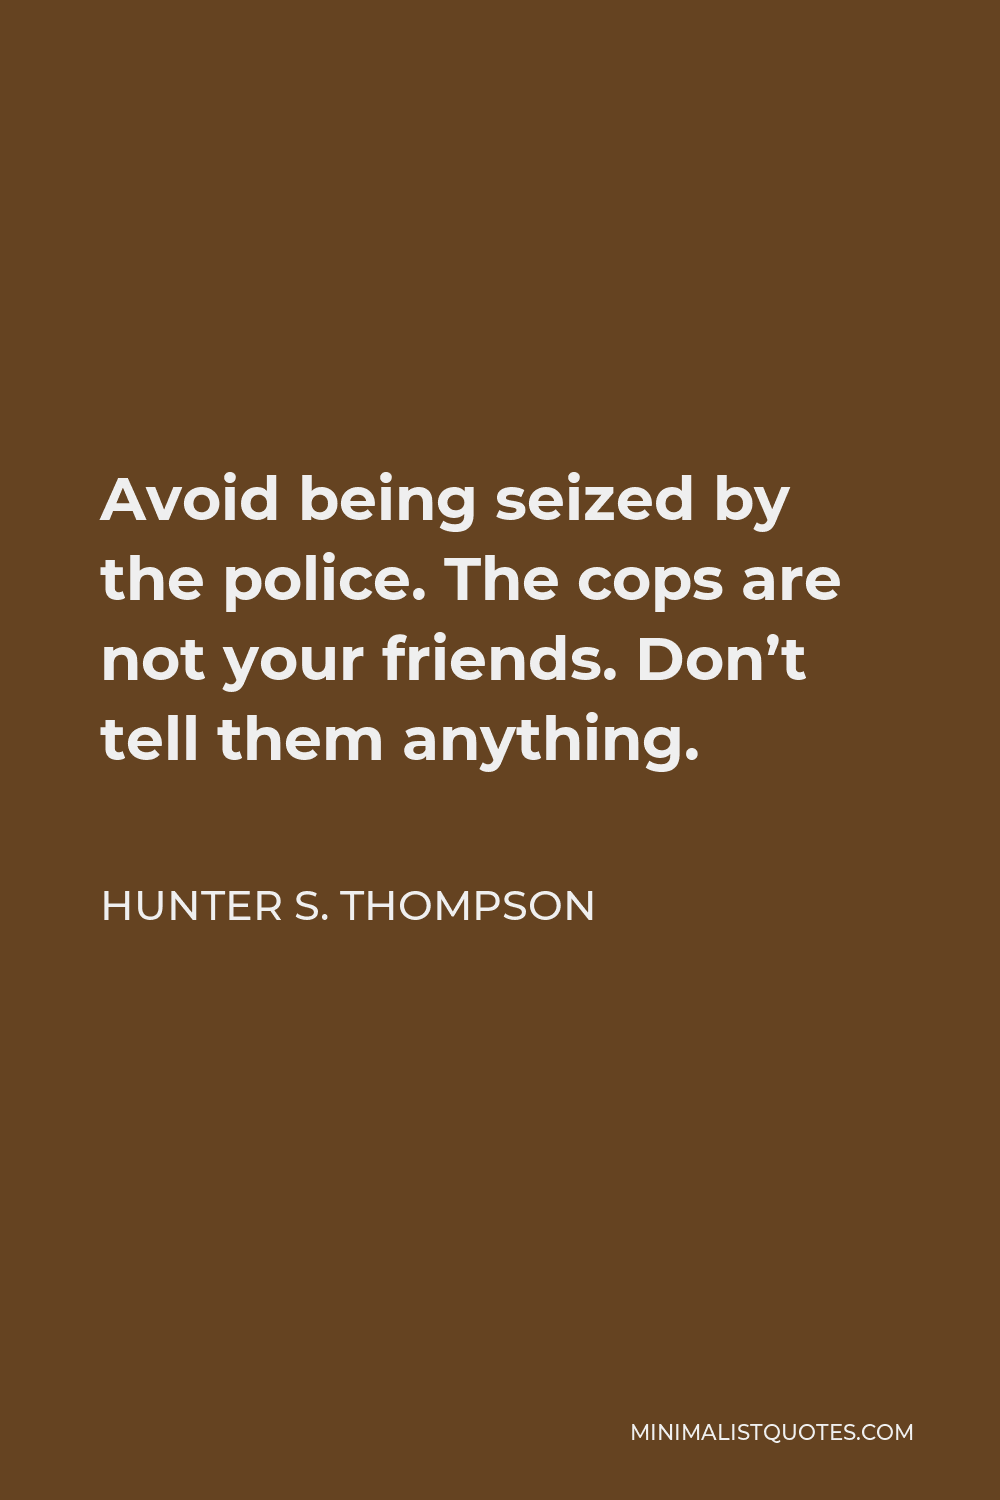 Hunter S. Thompson Quote - Avoid being seized by the police. The cops are not your friends. Don’t tell them anything.